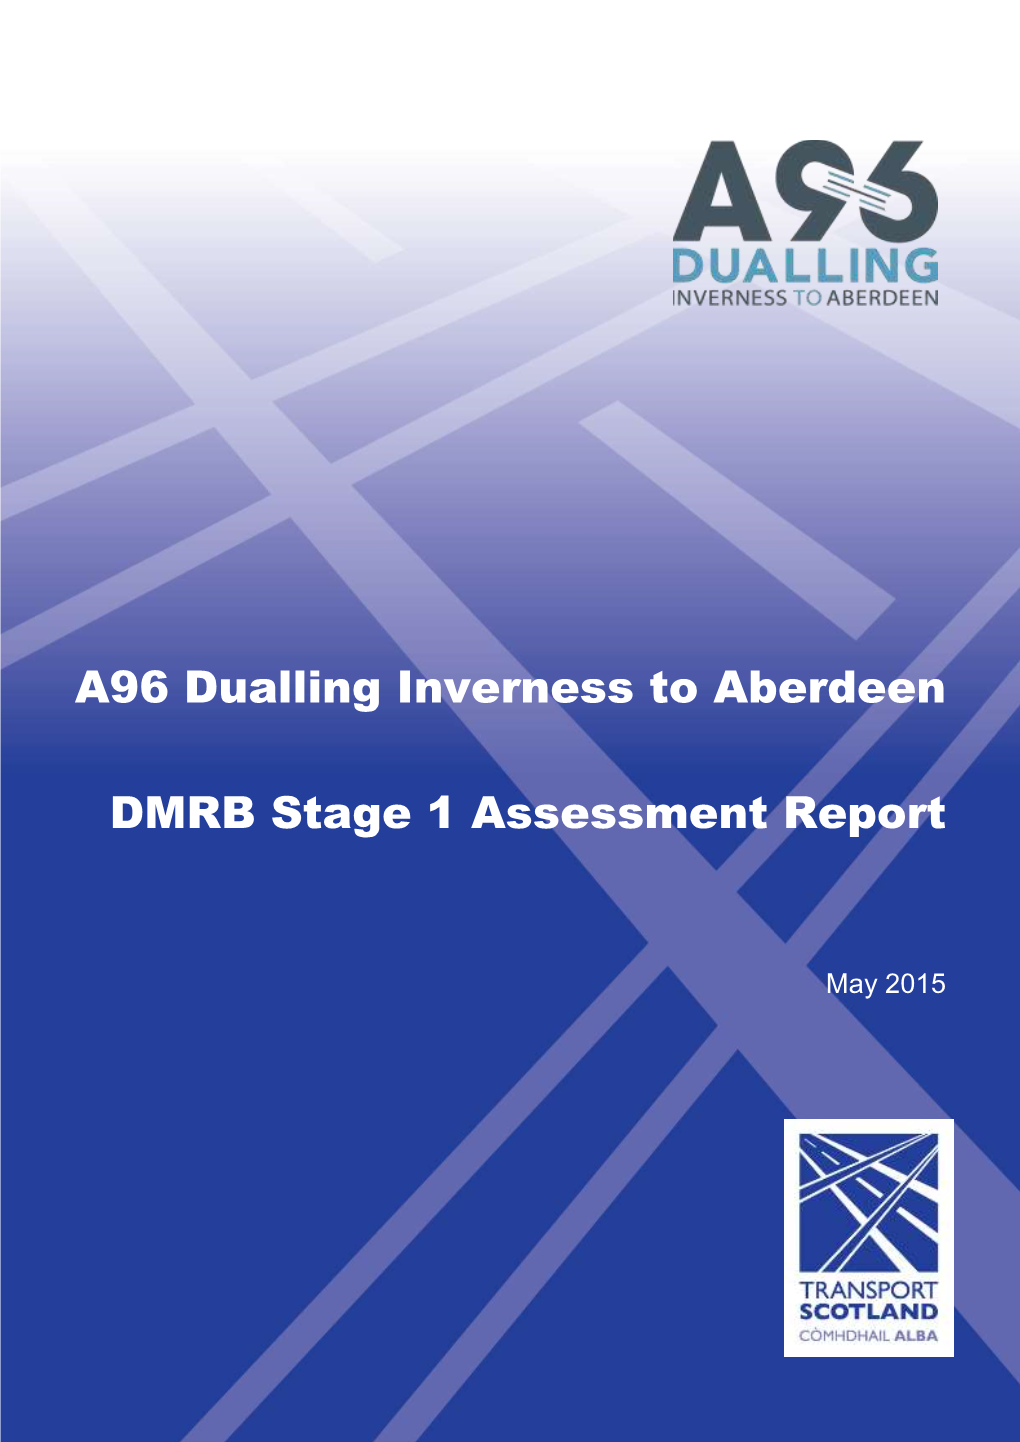 DMRB Stage 1 Assessment Report